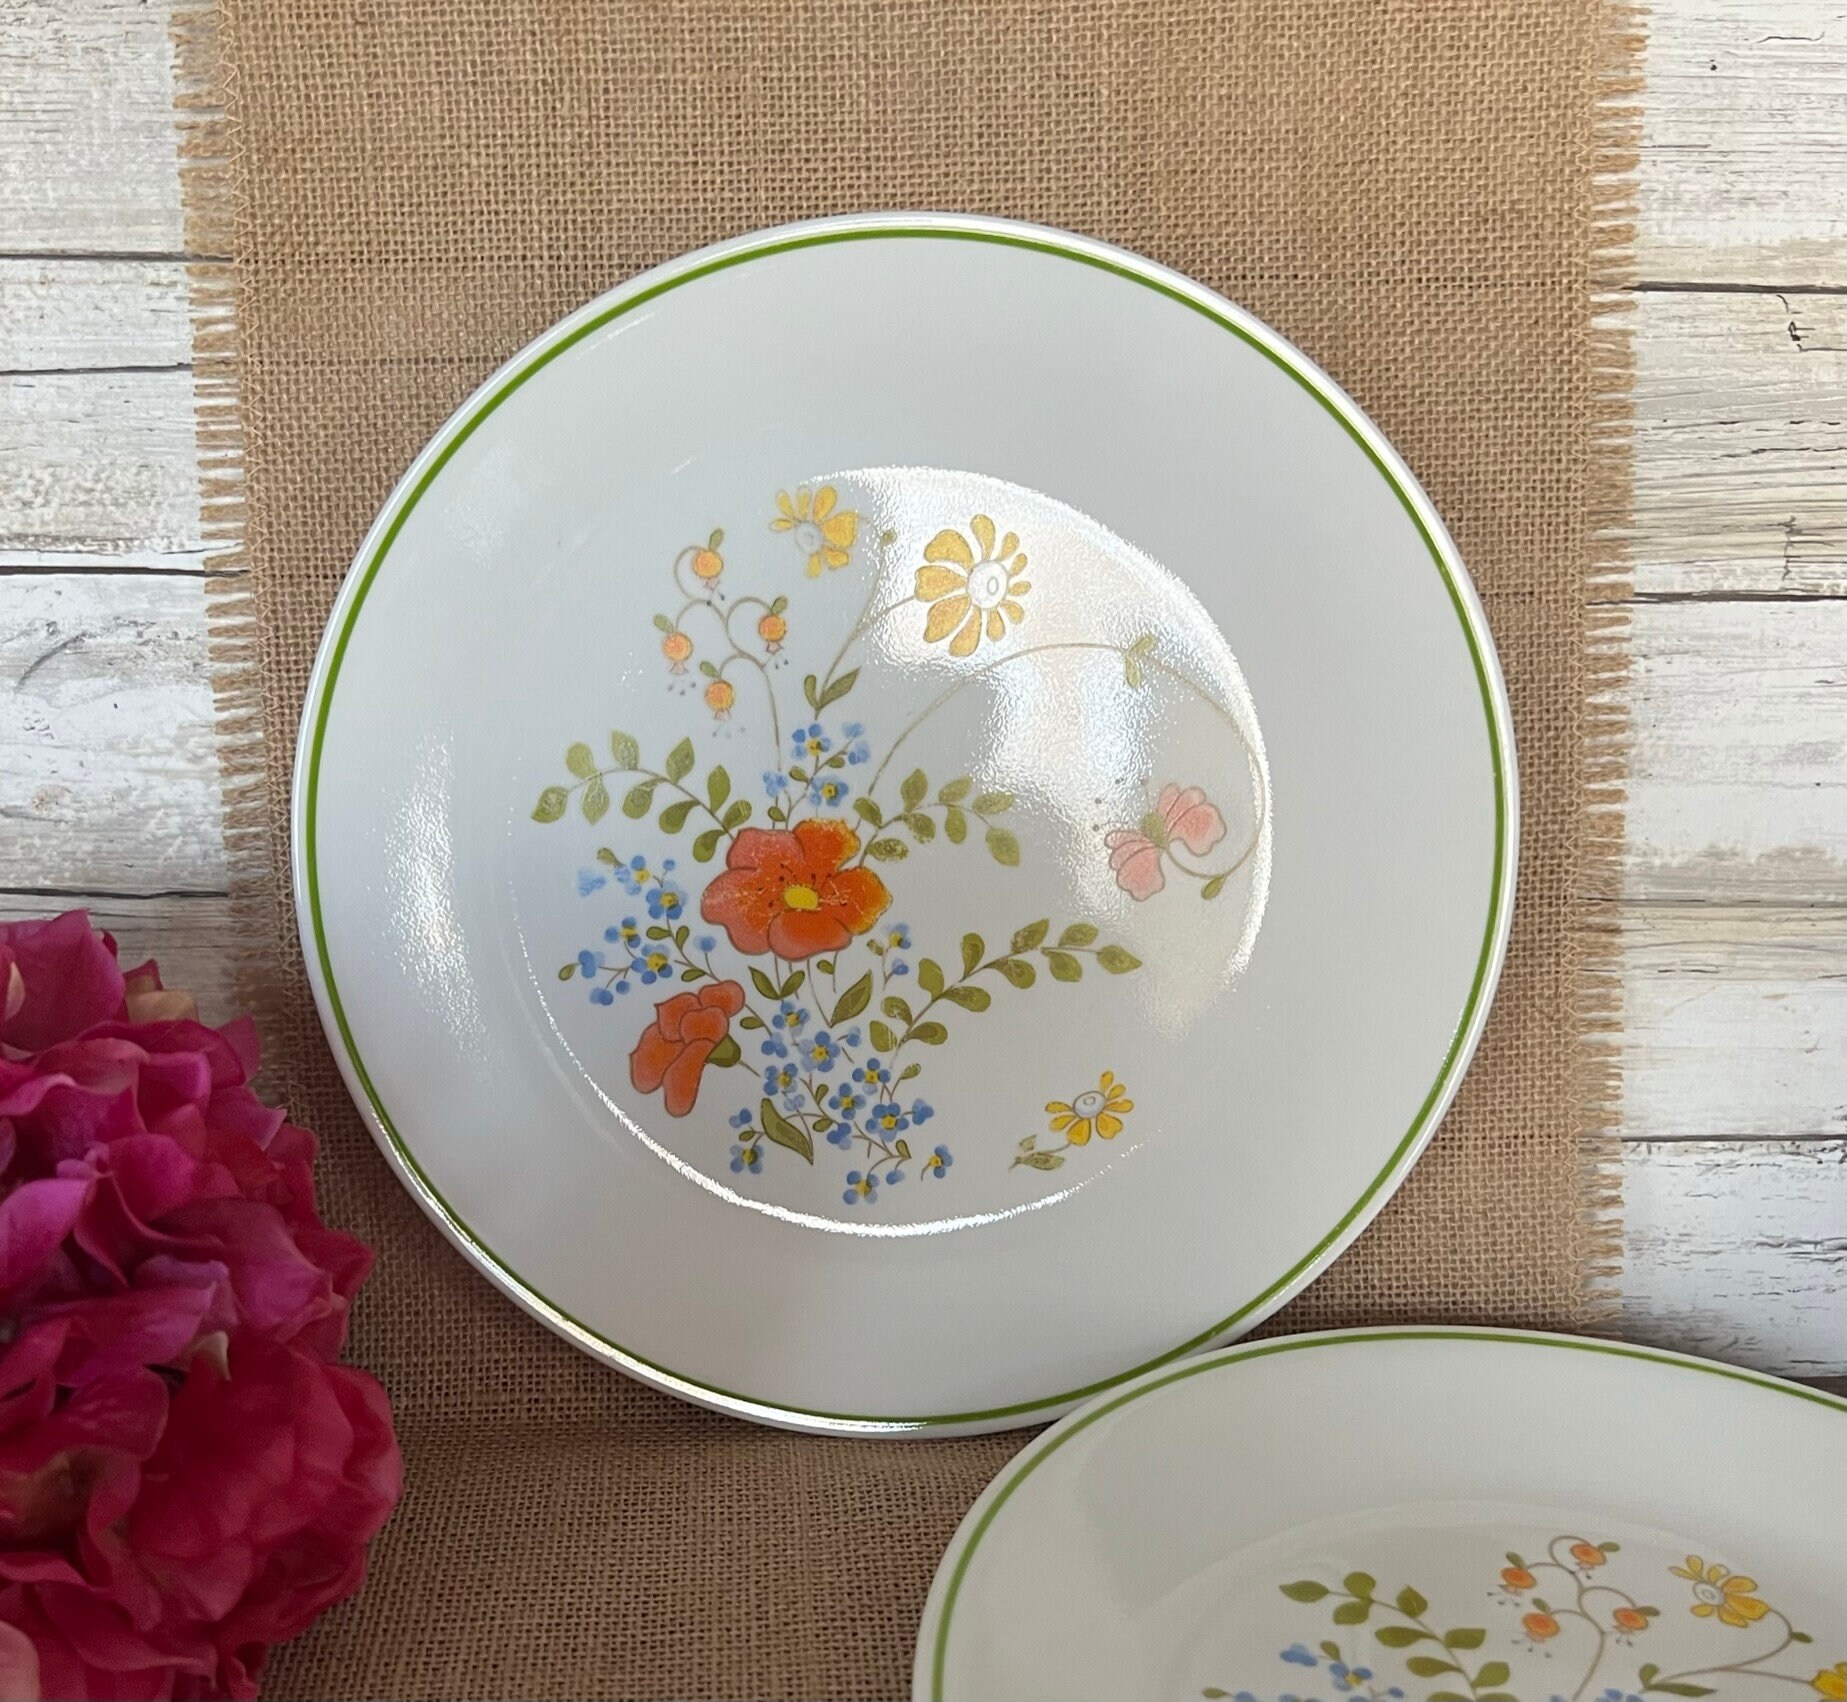 Set of 5 Vintage matching dinner plates made by Danmers Corelle ware type